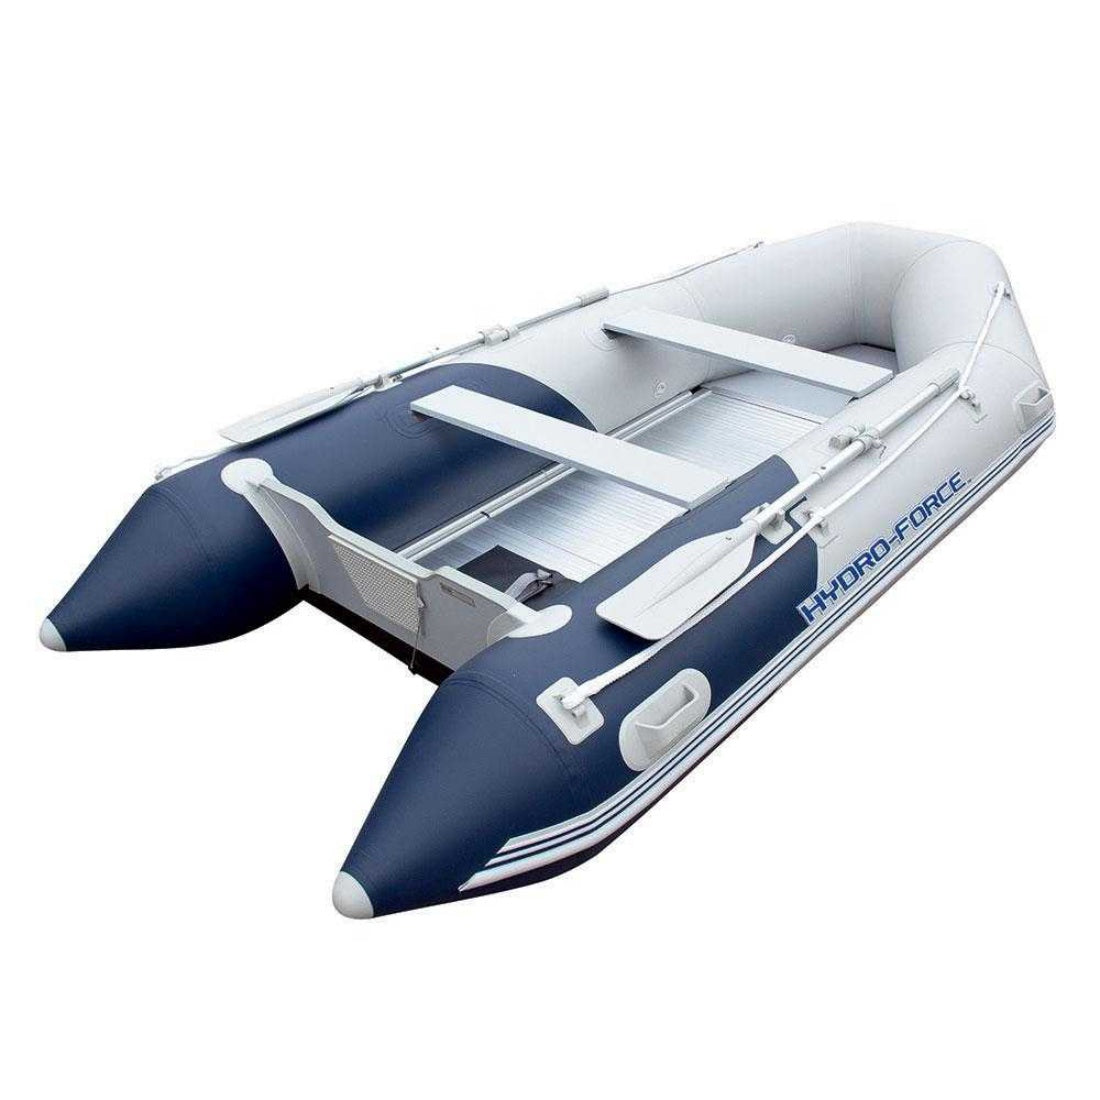 Bestway 3.3m Hydro-Force Inflatable Blow Up boat with Oars